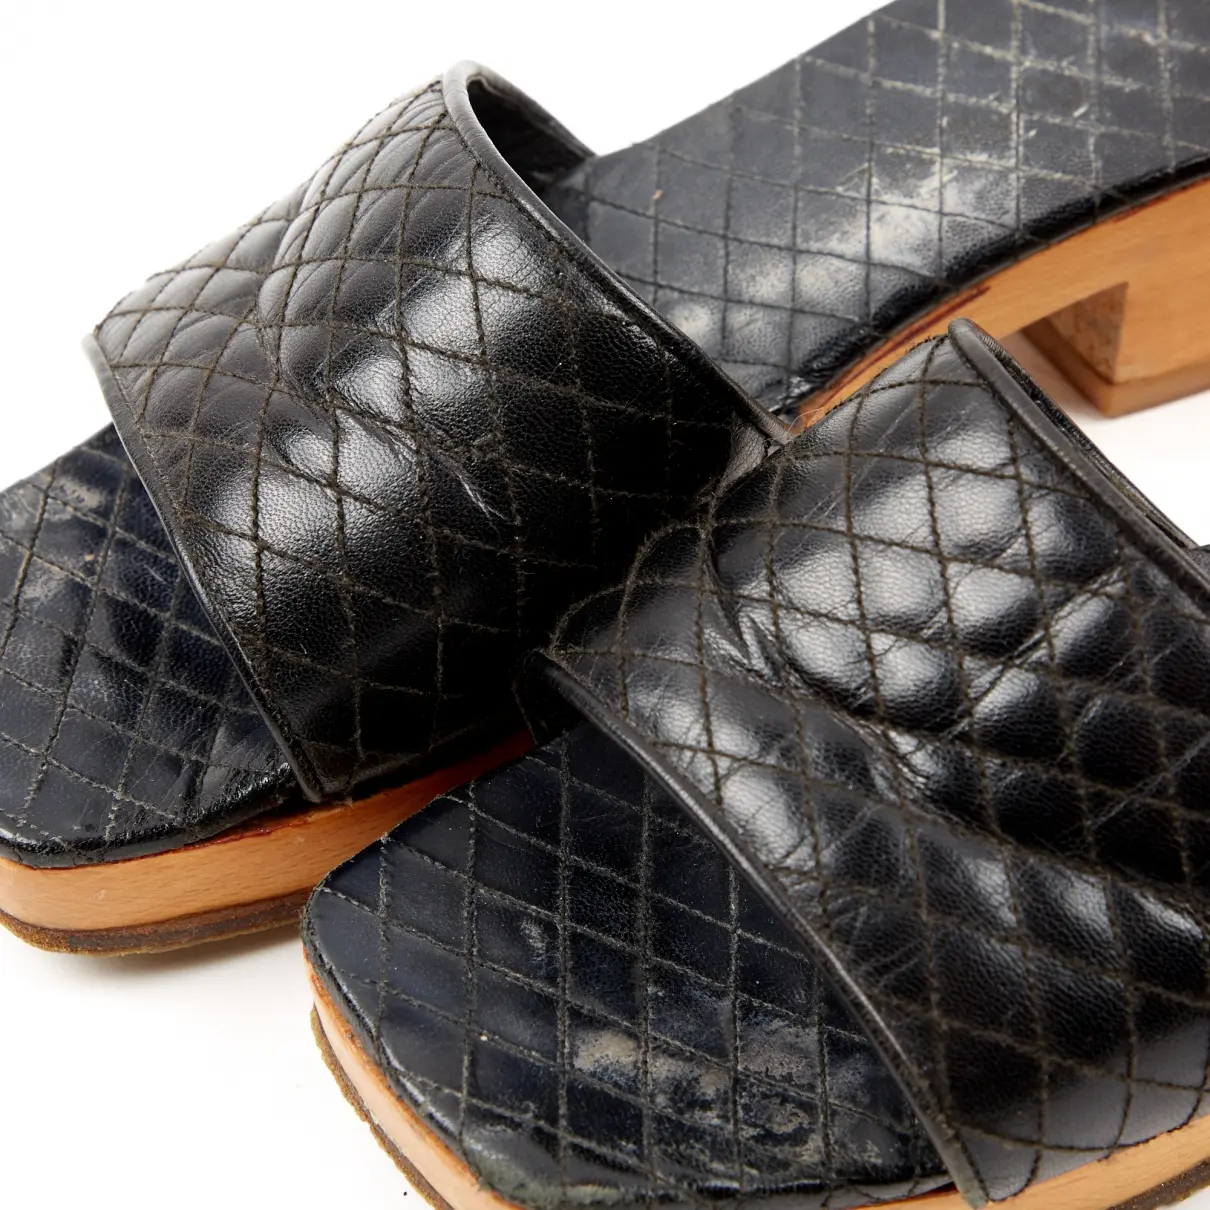 Leather mules & clogs Chanel - Vintage